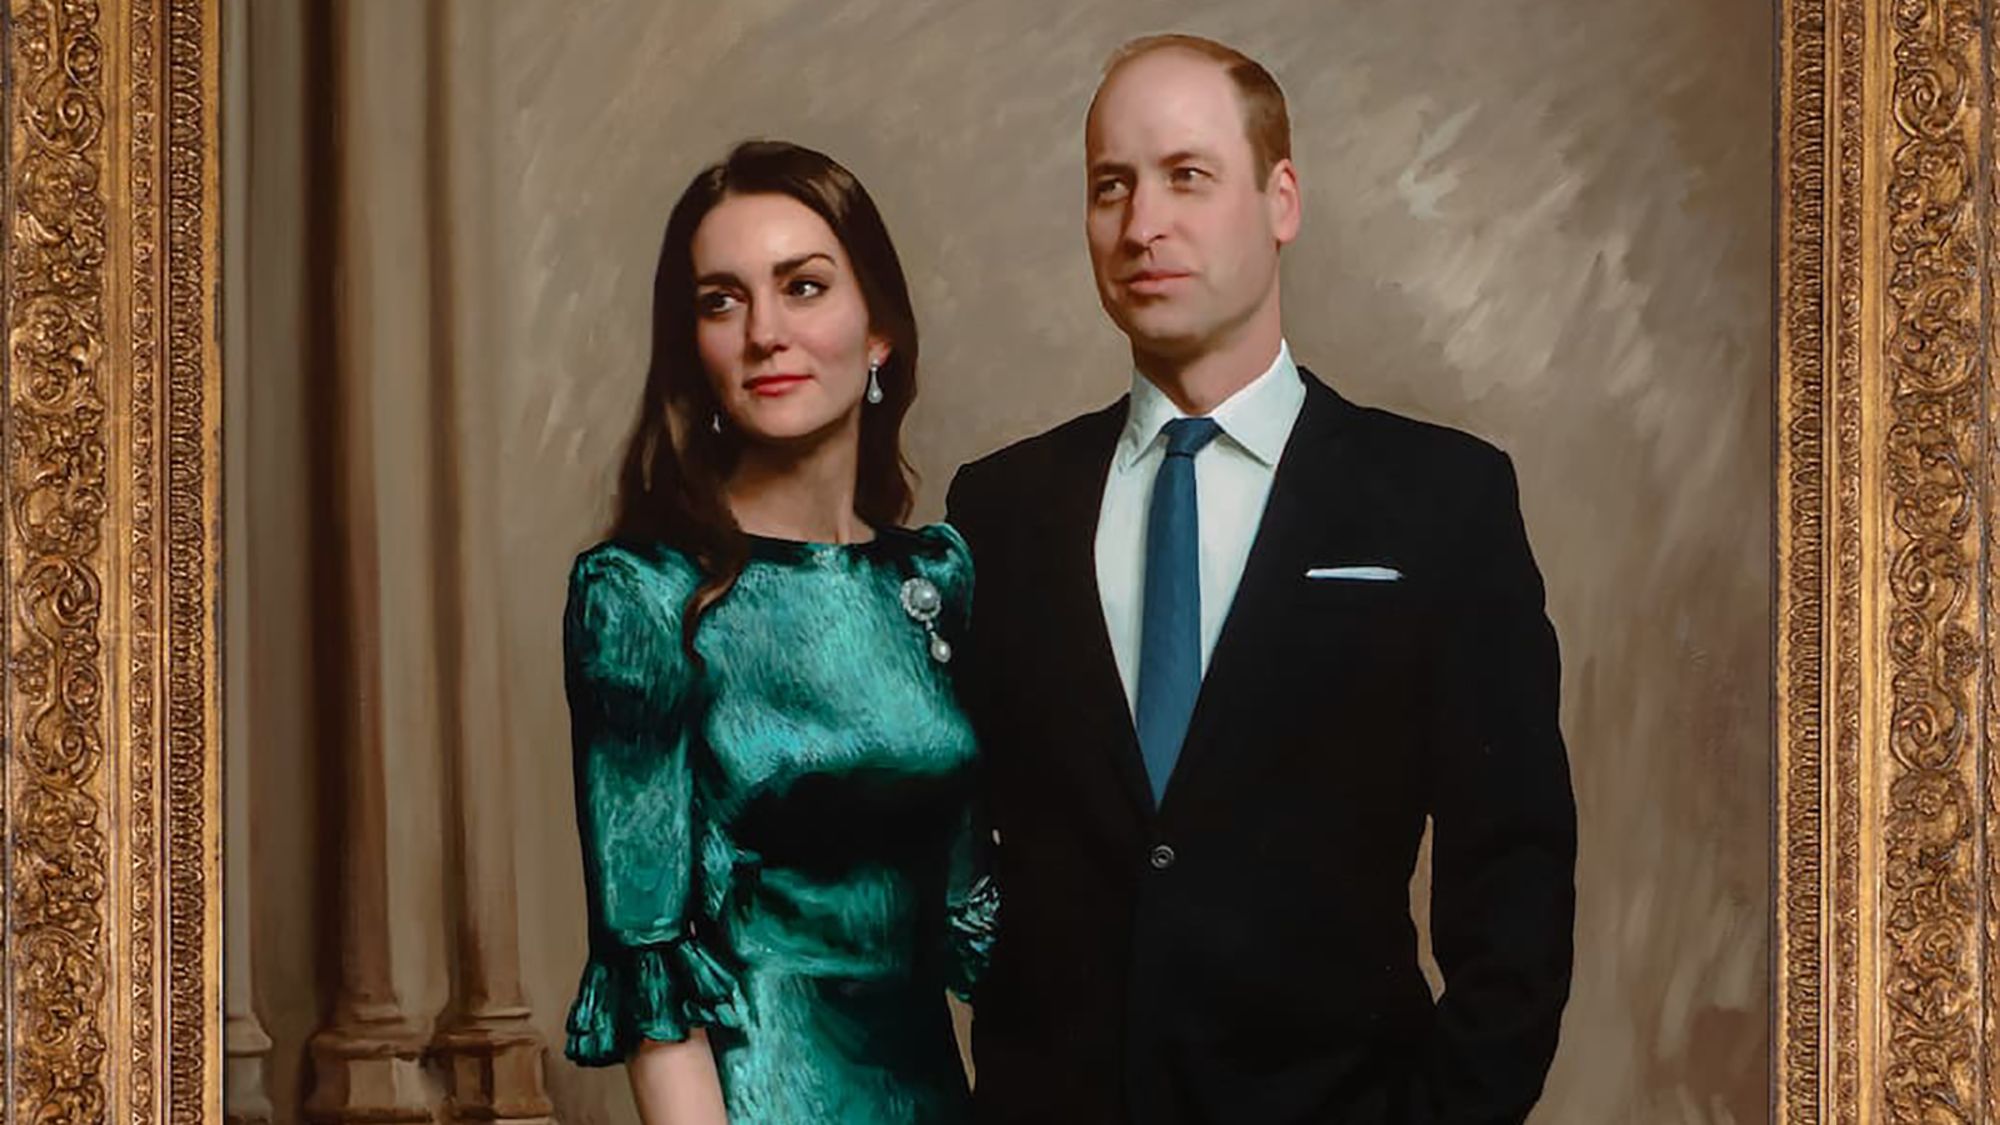 The first official joint portrait of Prince William and Kate has been